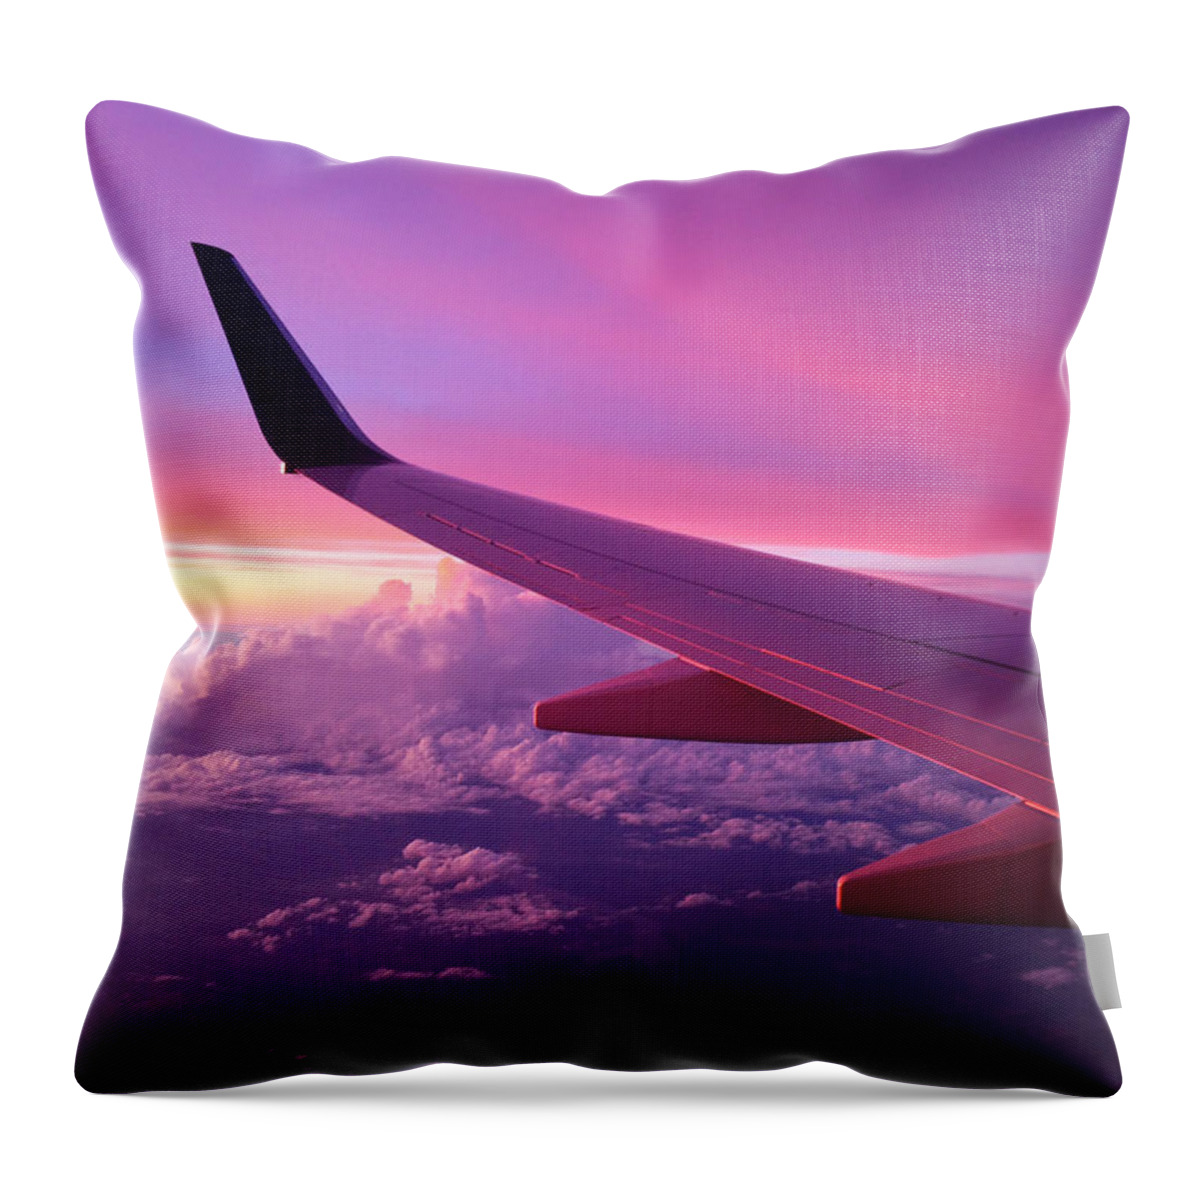 Pink Throw Pillow featuring the photograph Pink Flight by Chad Dutson